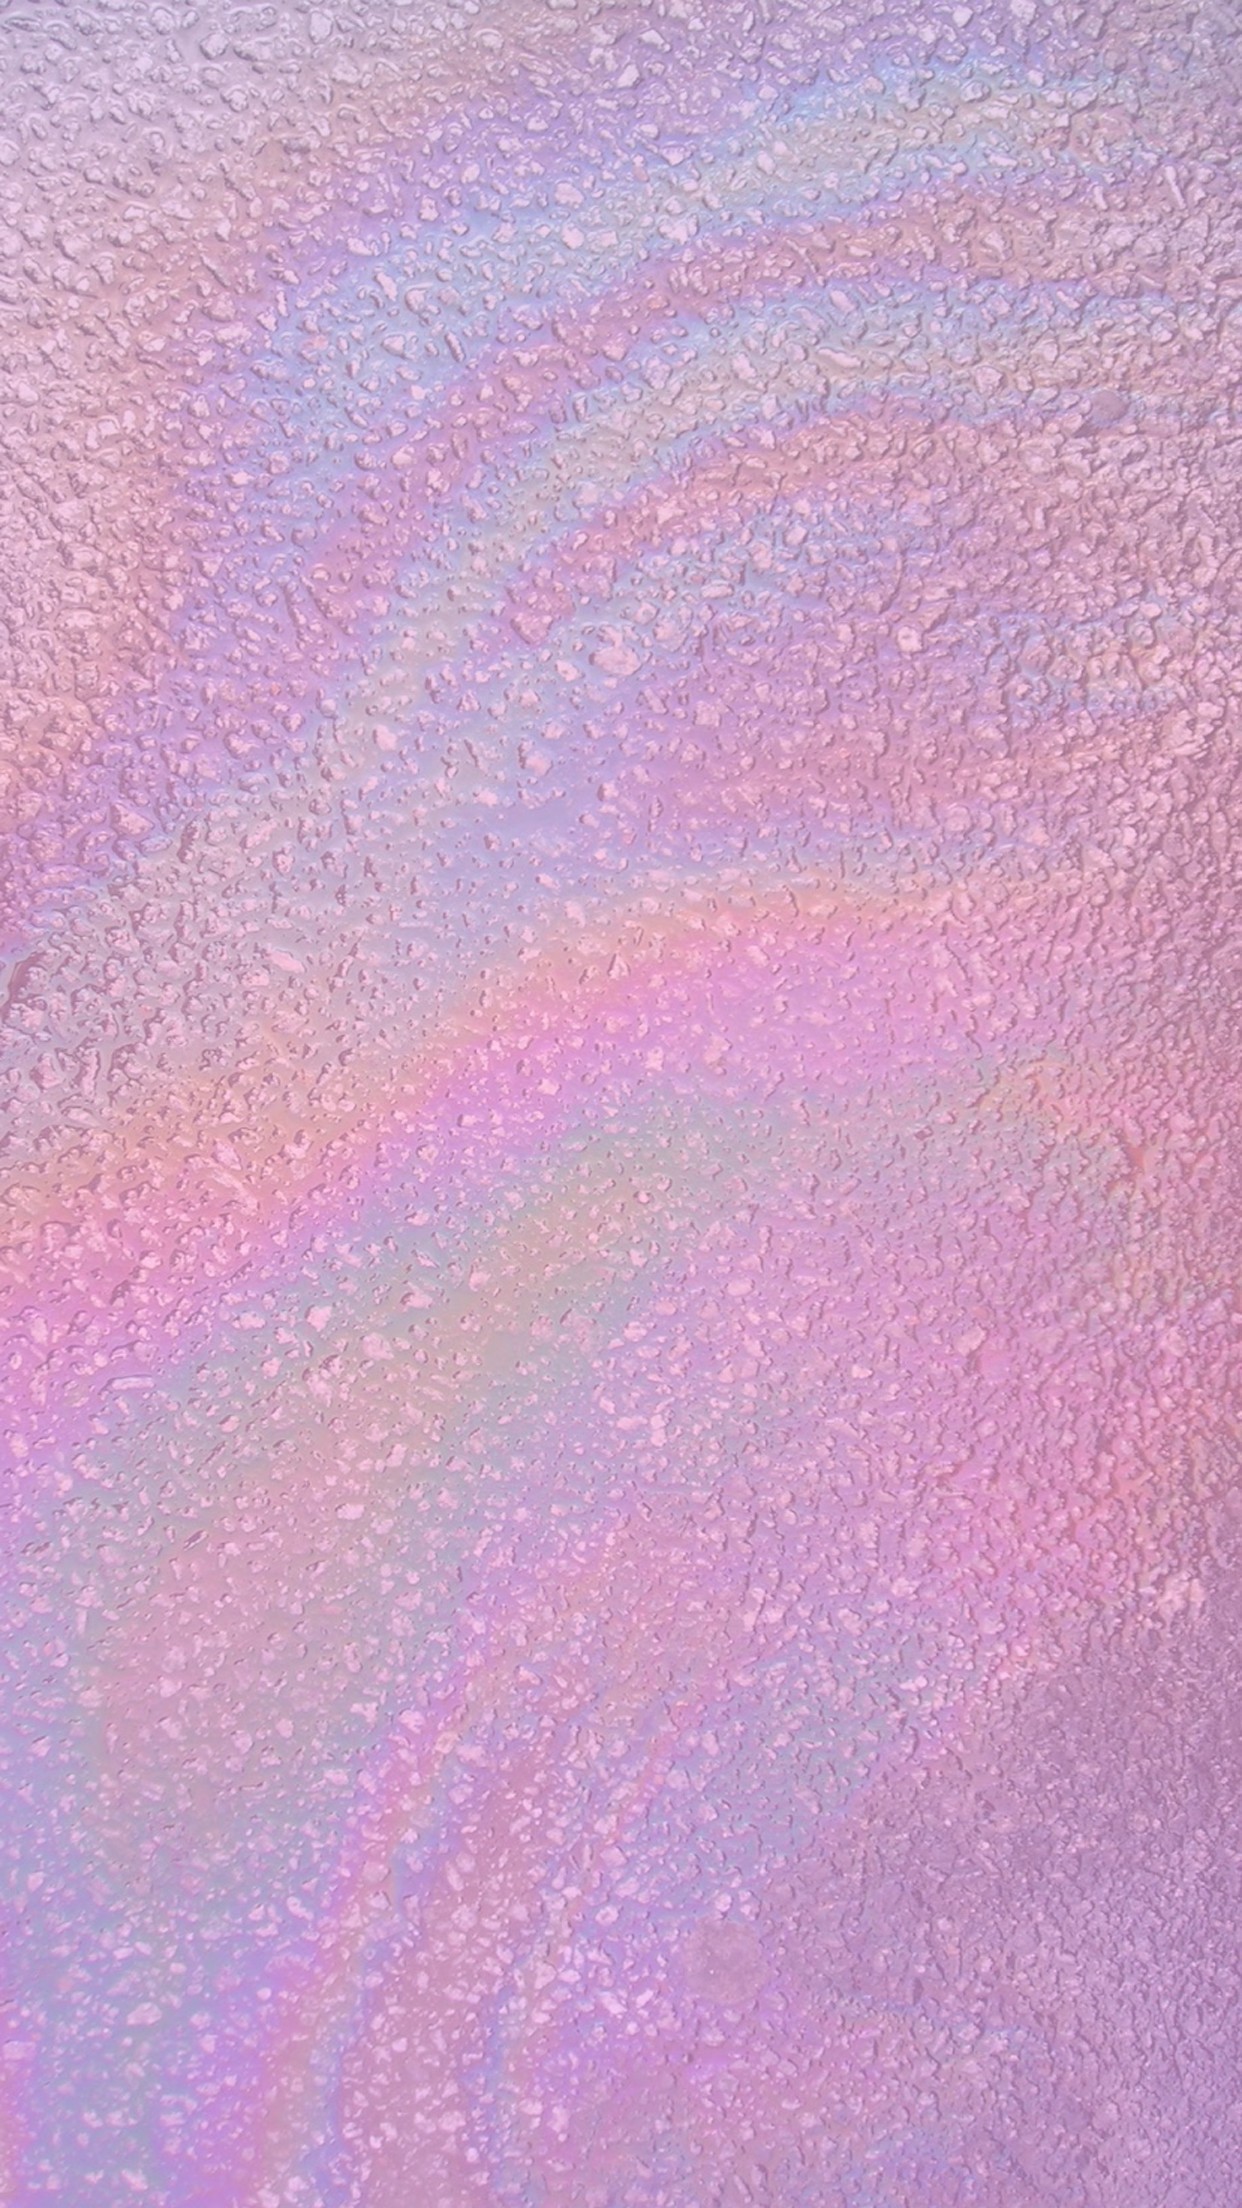 1242x2208 Pink Glitter Stardust iPhone 6 Plus Hd Wallpaper Luxury Pink Phone Wallpaper  64 Images Of 15